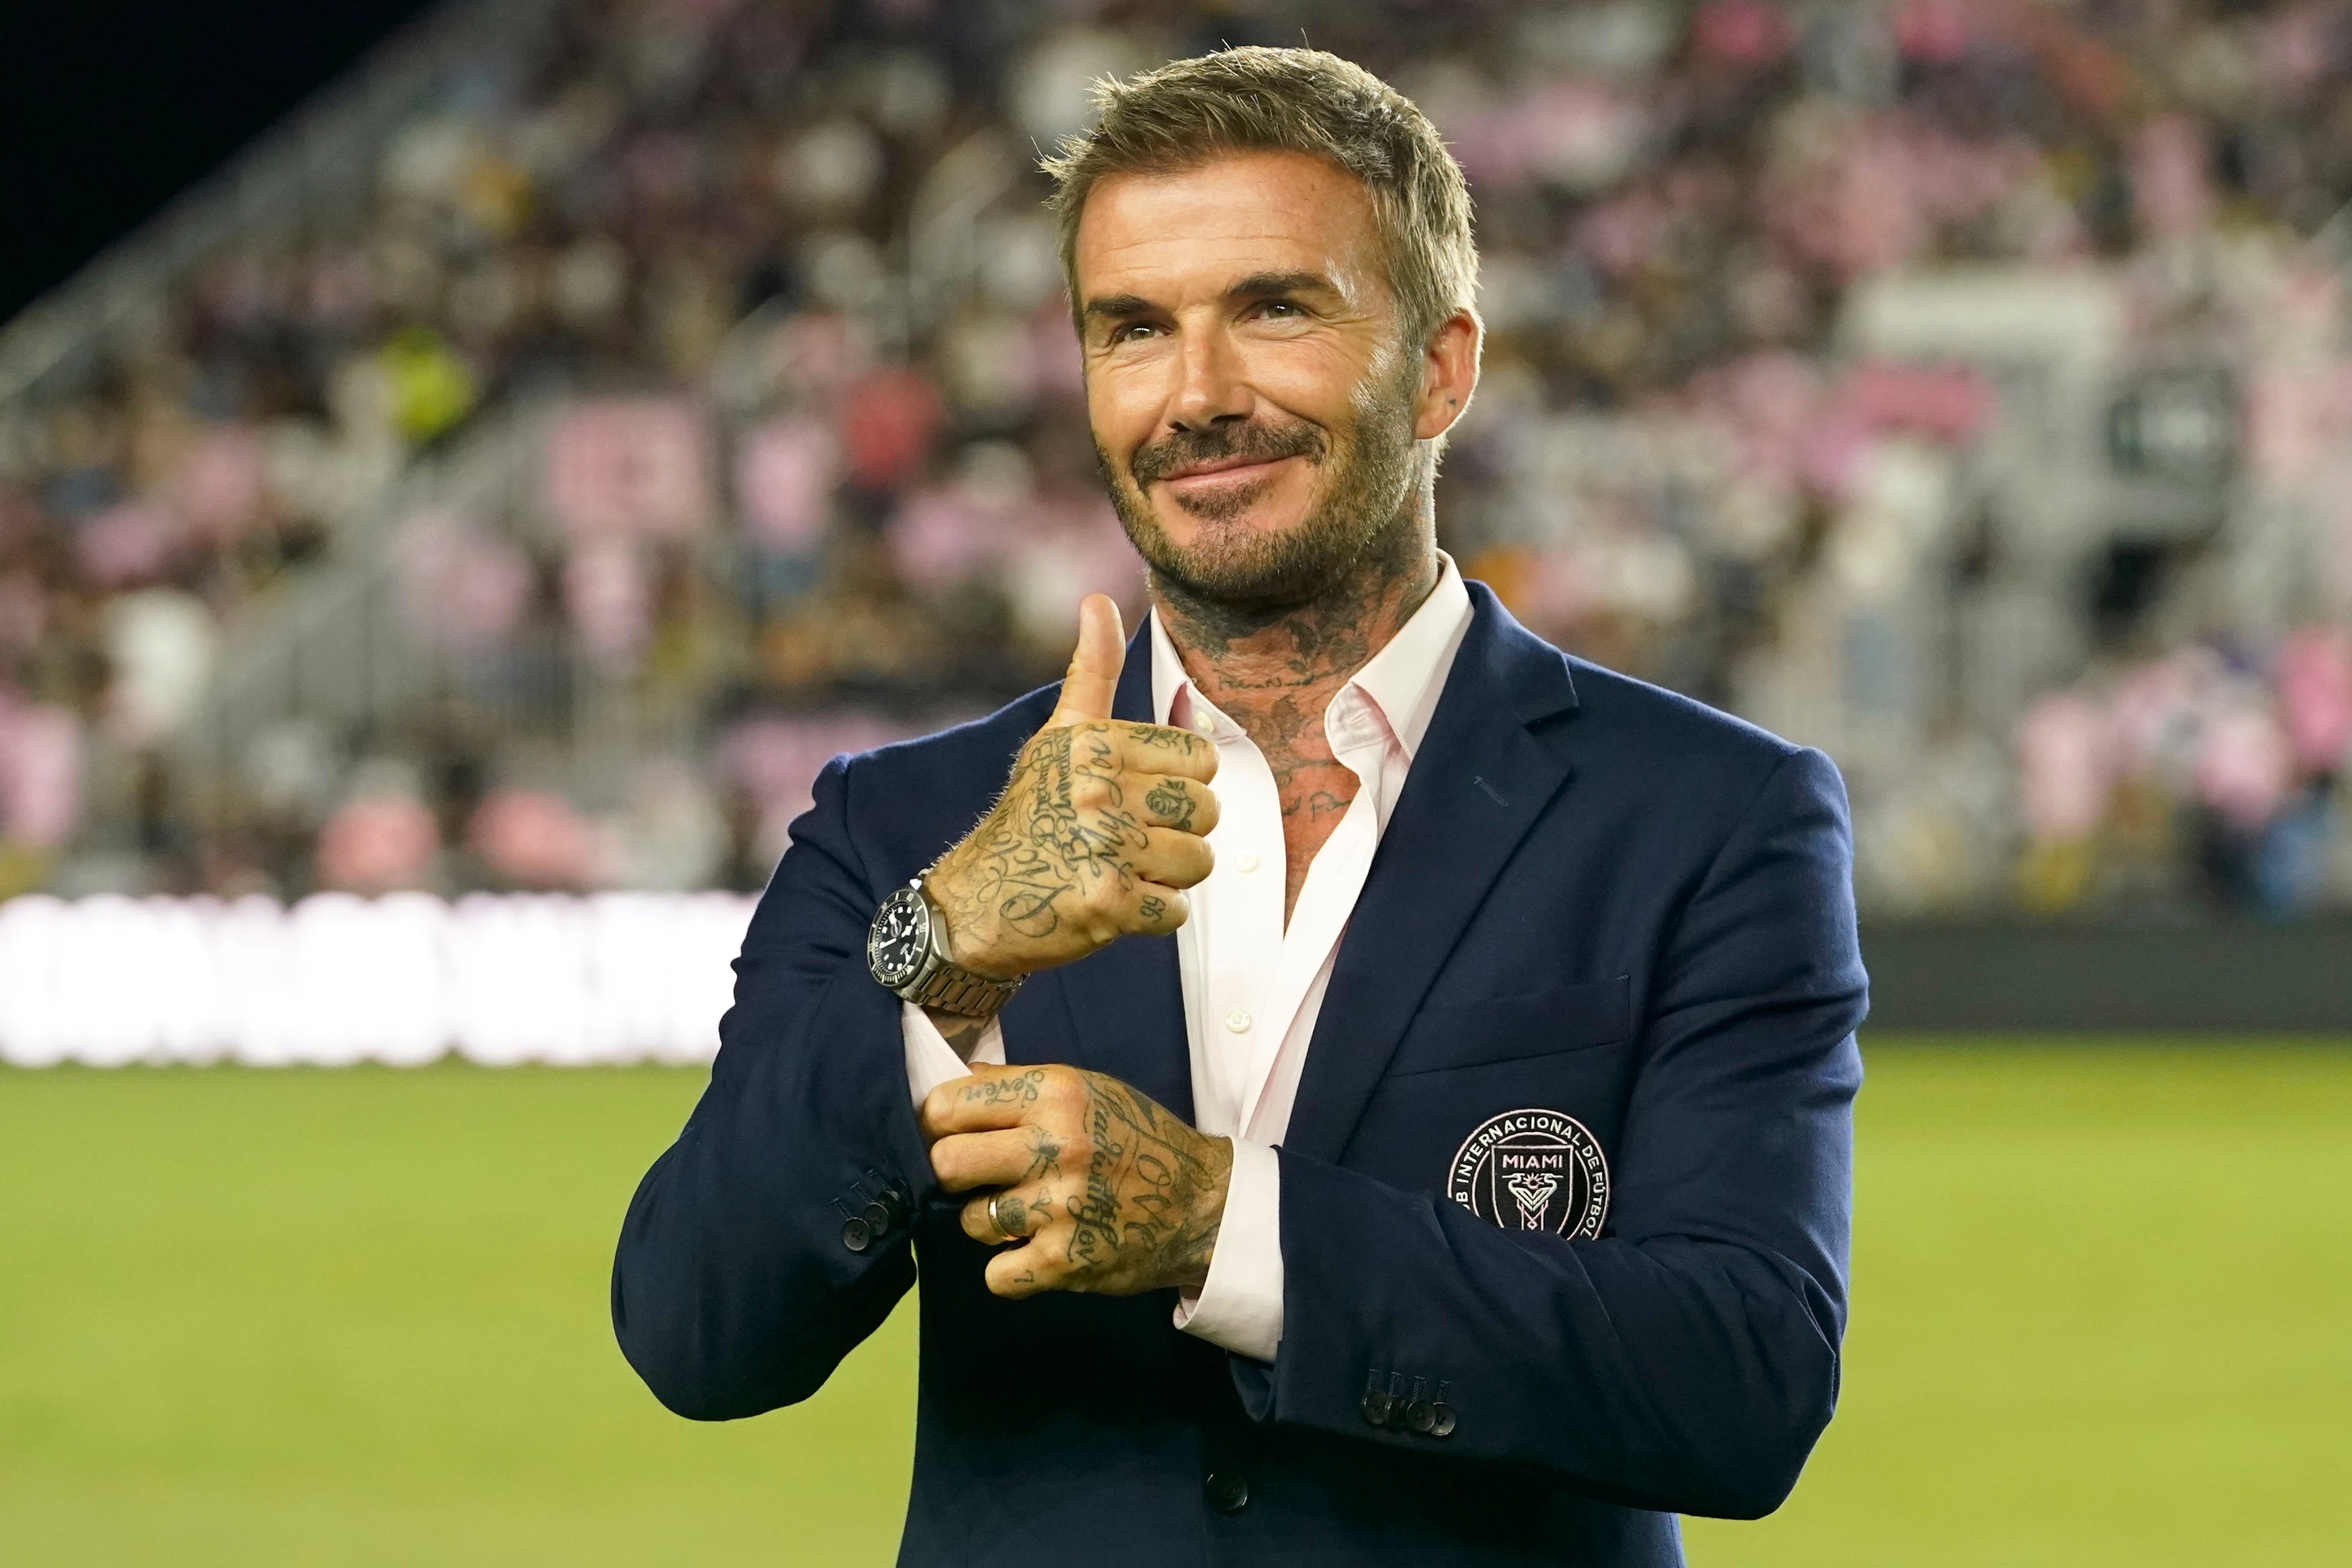 With David Beckham’s stewardship, Inter Miami fixtures have become must-see events for the A-list